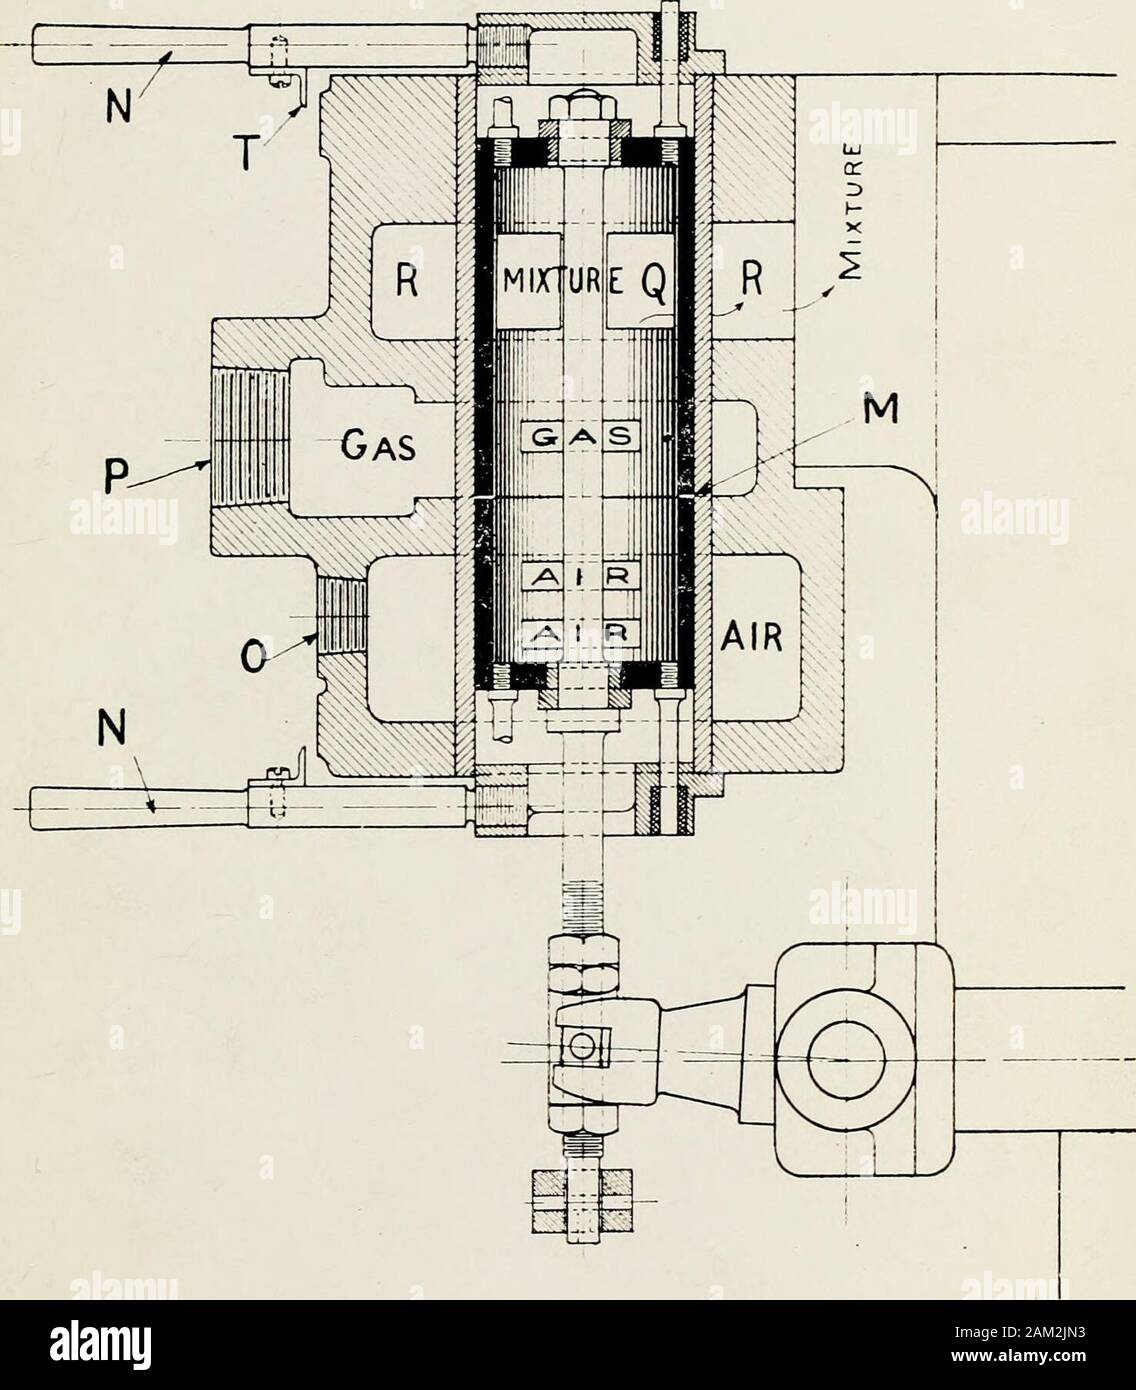 Design, installation and operation of cams for the valve-gear of a three-cylinder, 8 x 10 inWestinghouse gas engine . iigure5. Figure 6 3 siua- one piece and bolted to a concrete foundation. The threecylinders are separate castings, are water jacketed, and aretolted to the cramk case. The valve chaAbers are tolted tothe upper ends of the cylinders. The main shaft and cranks,which are set 120 degrees apart, operate in the crank case.Lubrication is effected by means of large oil cups on themain bearings. The drips frorri these bearings discharge intothe crank case so that the internal working p Stock Photo